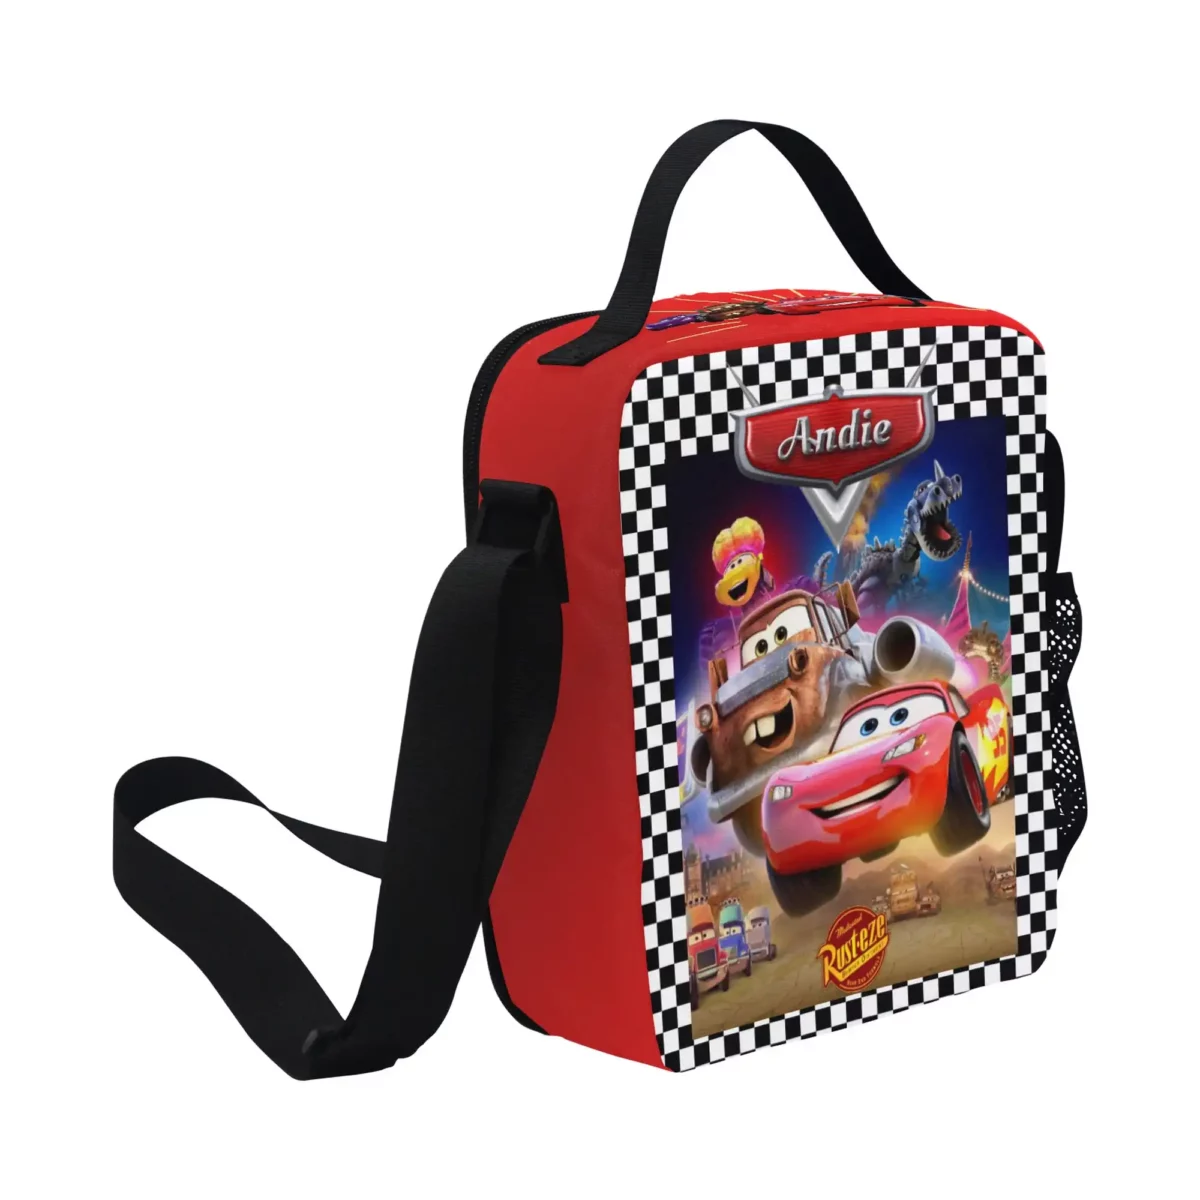 Personalized Lightning McQueen Lunch Bag for kids. Insulated interior Lunchbox from Cars Cartoon Cool Kiddo 18